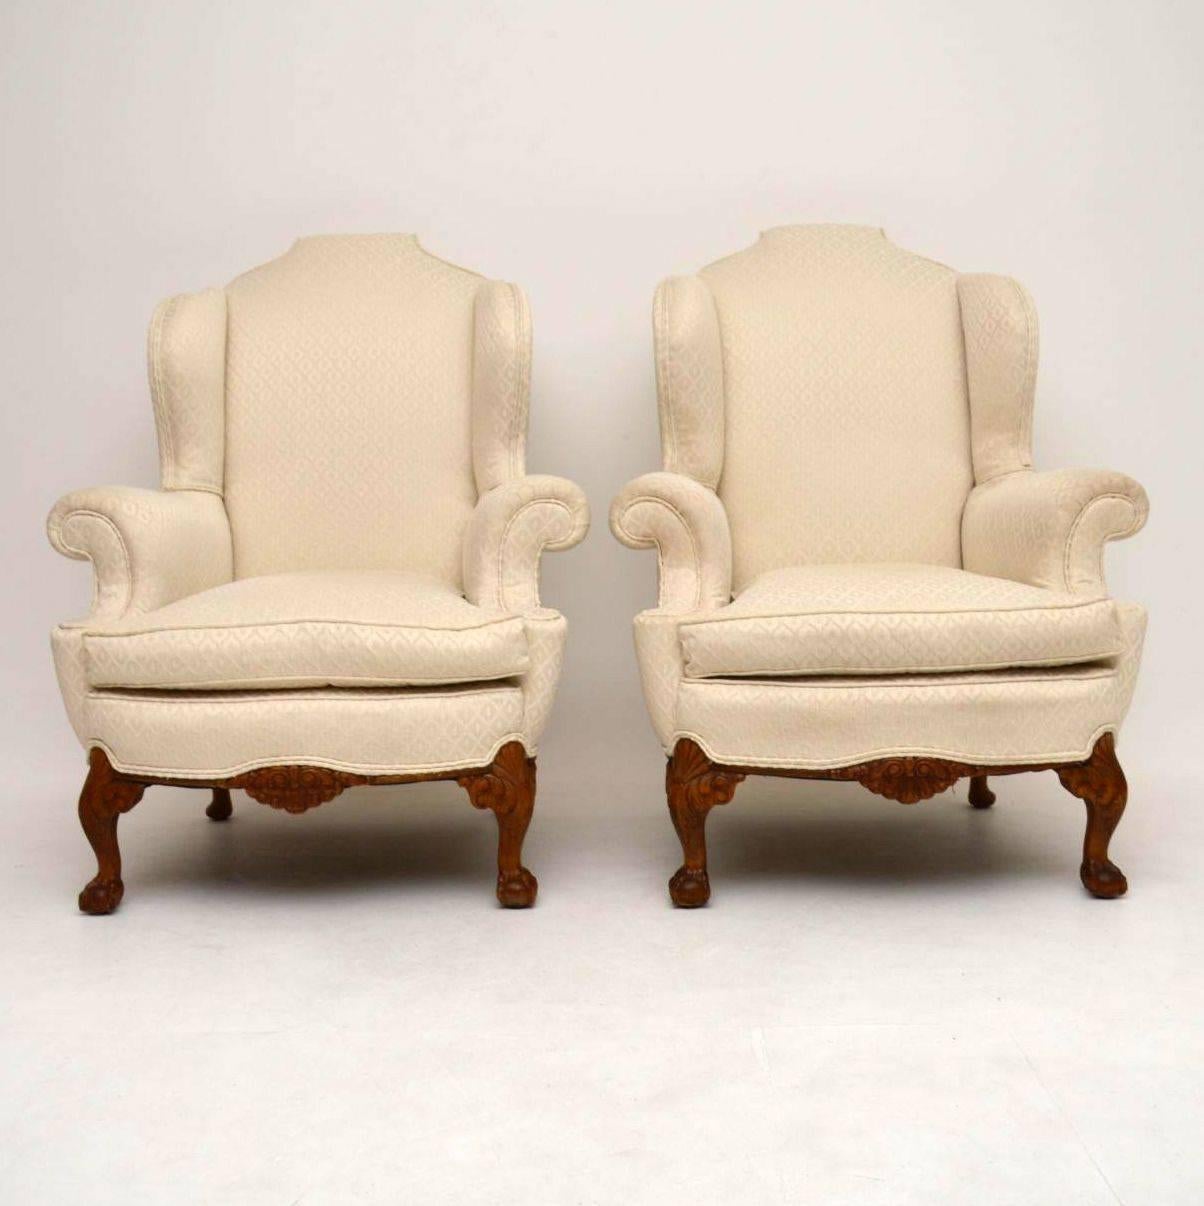 Very impressive and comfortable pair of antique wing armchairs in good condition and dating from circa 1920s period. They have high scroll over hump backs, wide wings and arms, loose cushions and sit on solid walnut carved frames. The carving on the